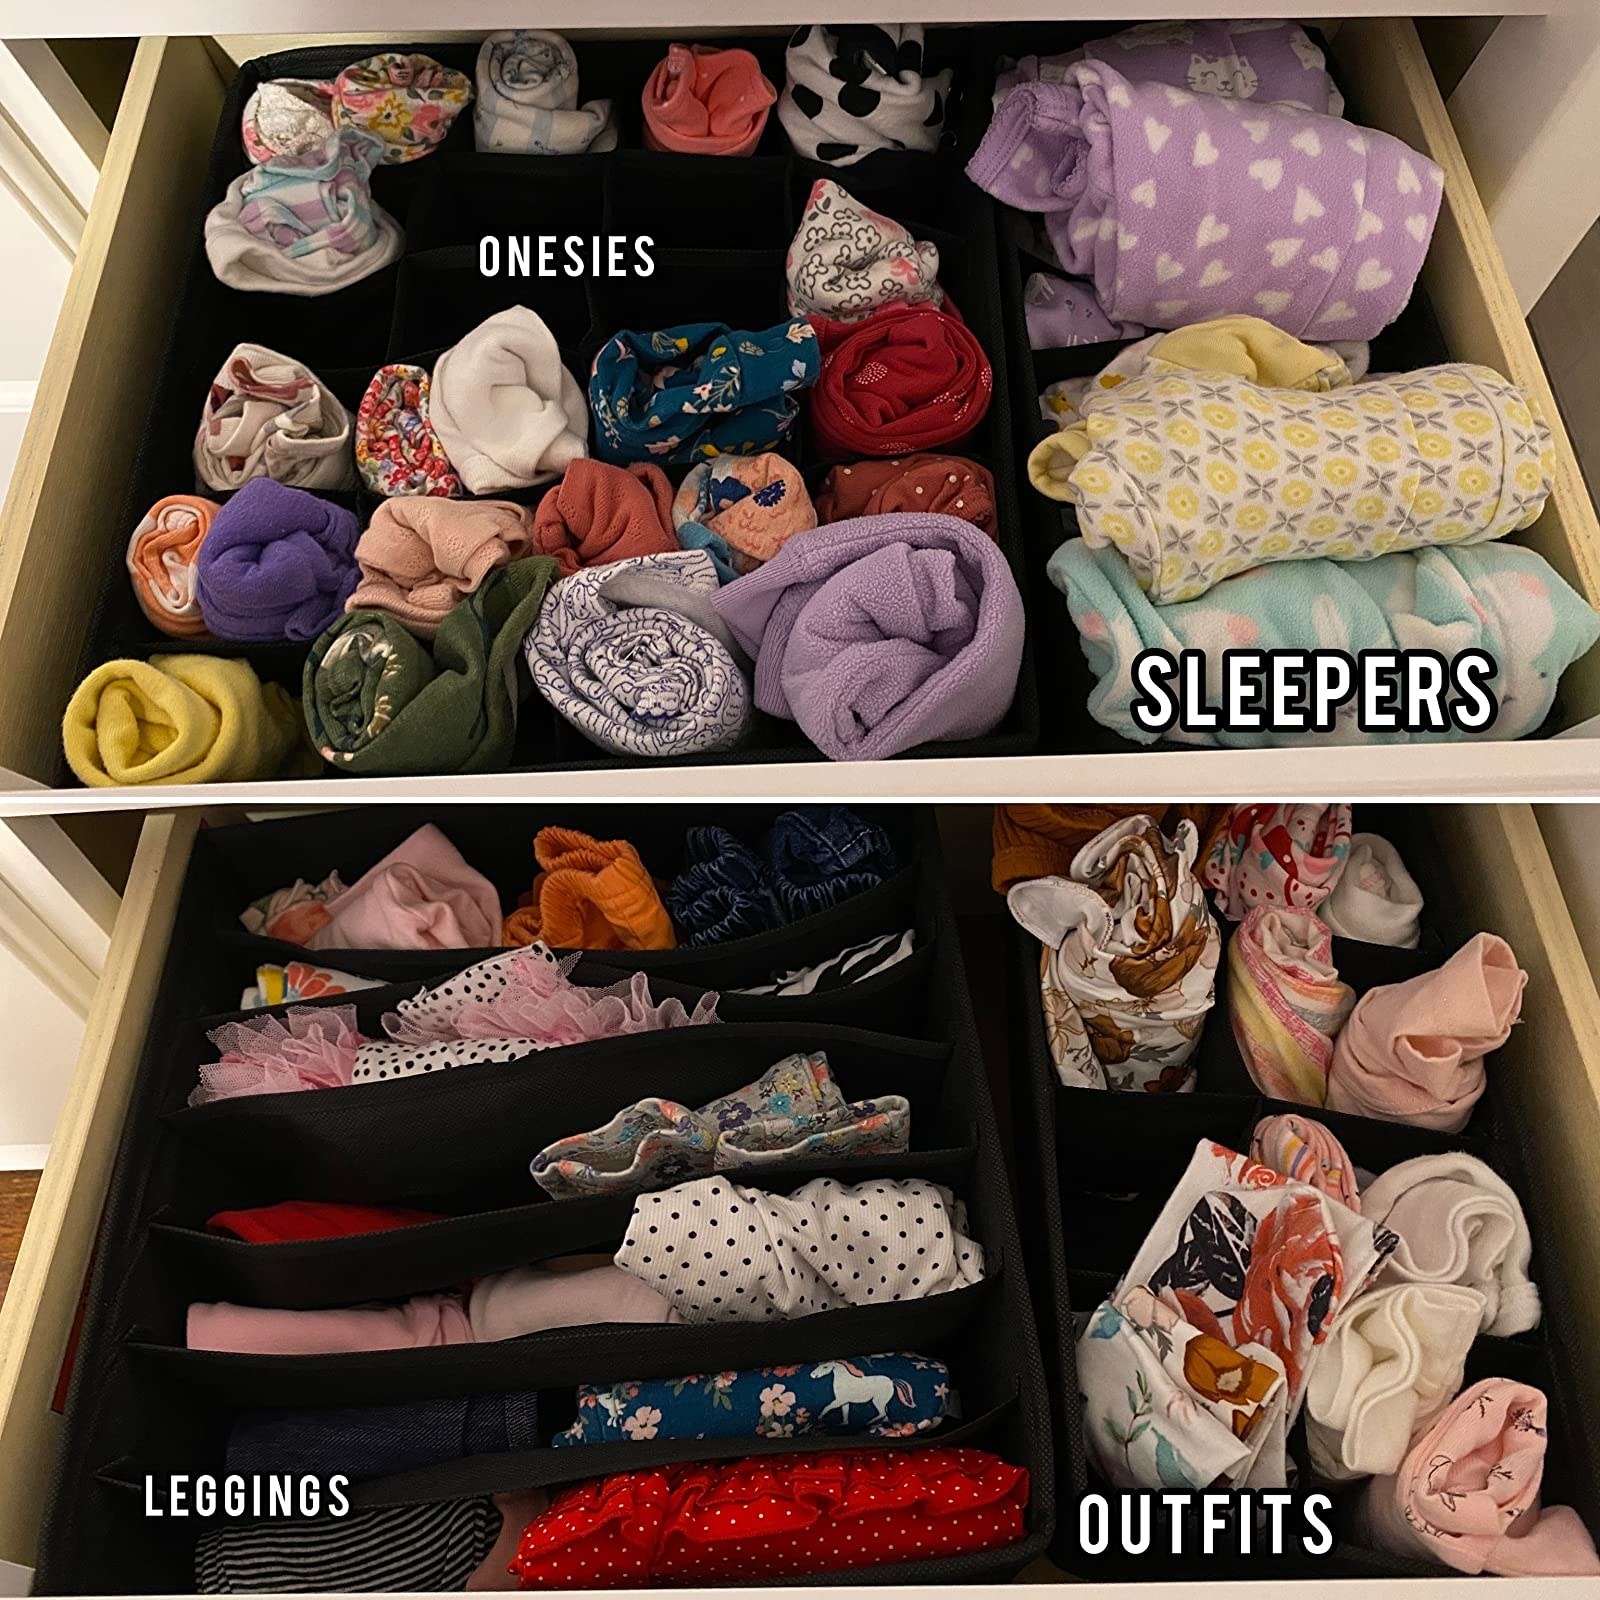 Reviewer&#x27;s photos showing their child&#x27;s onsies, sleepers, leggings and outfits organized